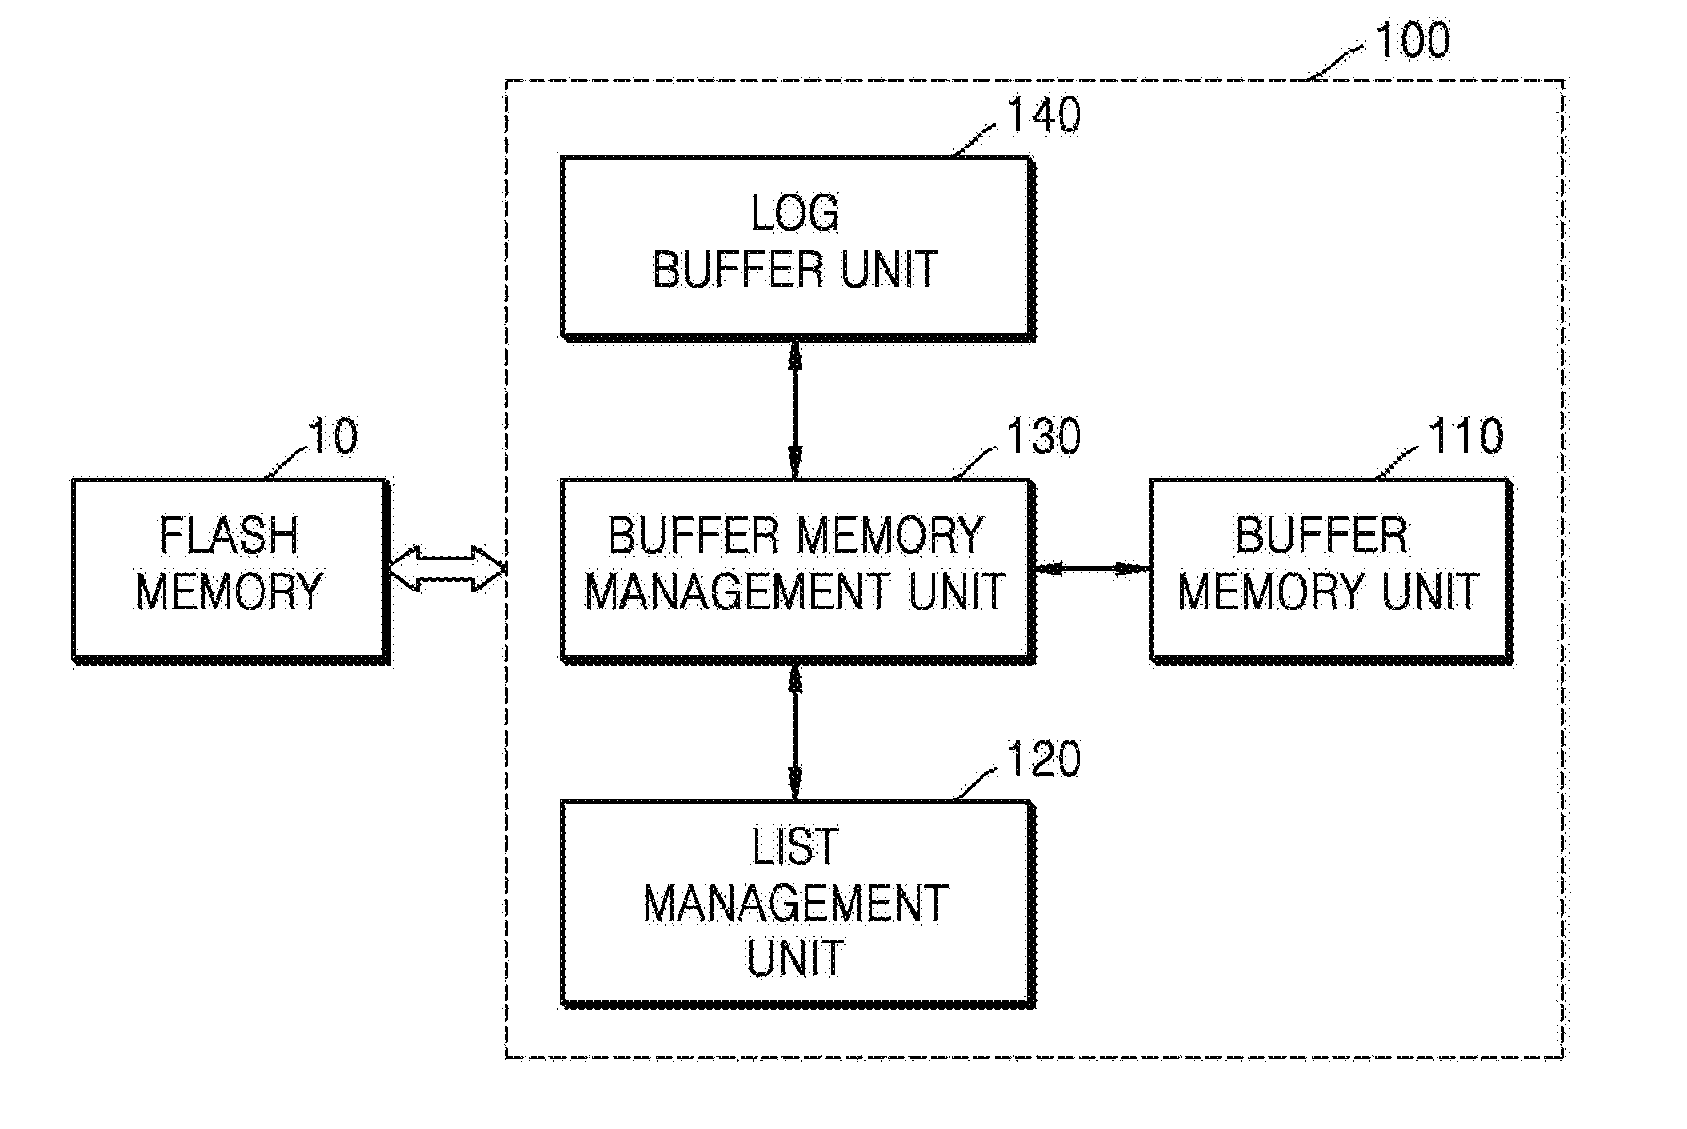 Apparatus and method for managing buffer having three states on the basis of flash memory